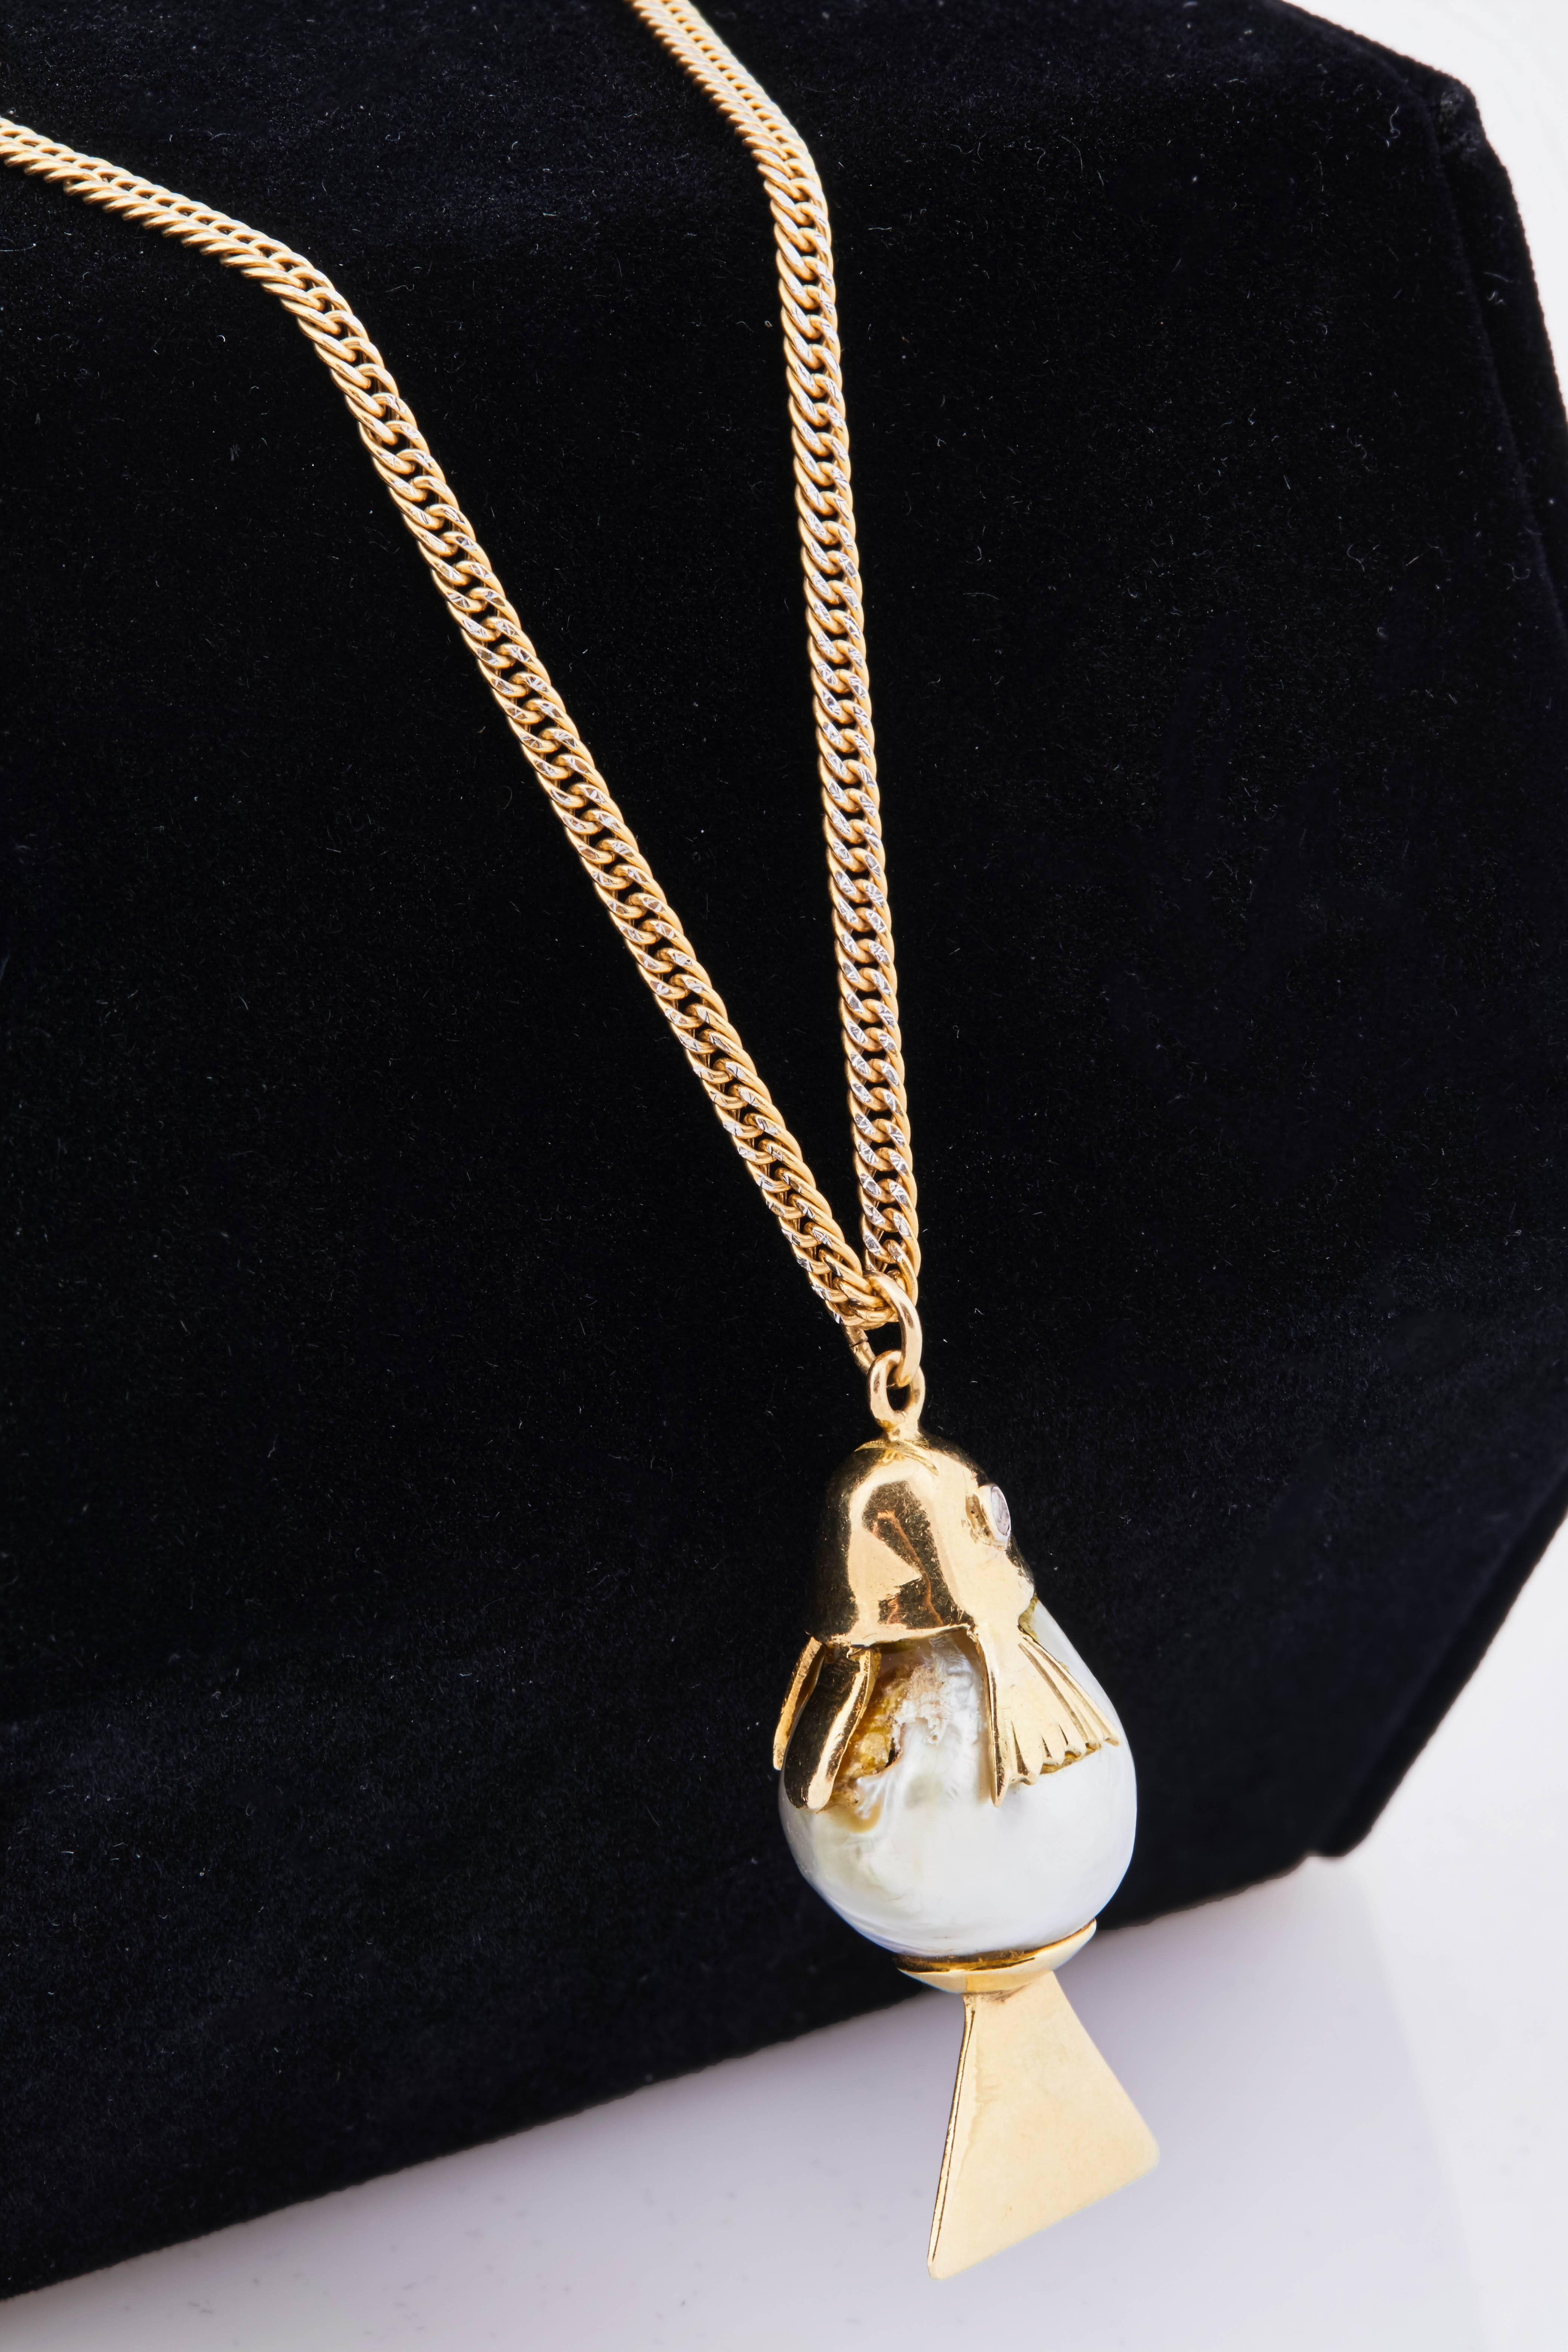 Italian natural pearl, 18k gold and diamond fish charm on 18k gold chain. Chain is 24" long. 